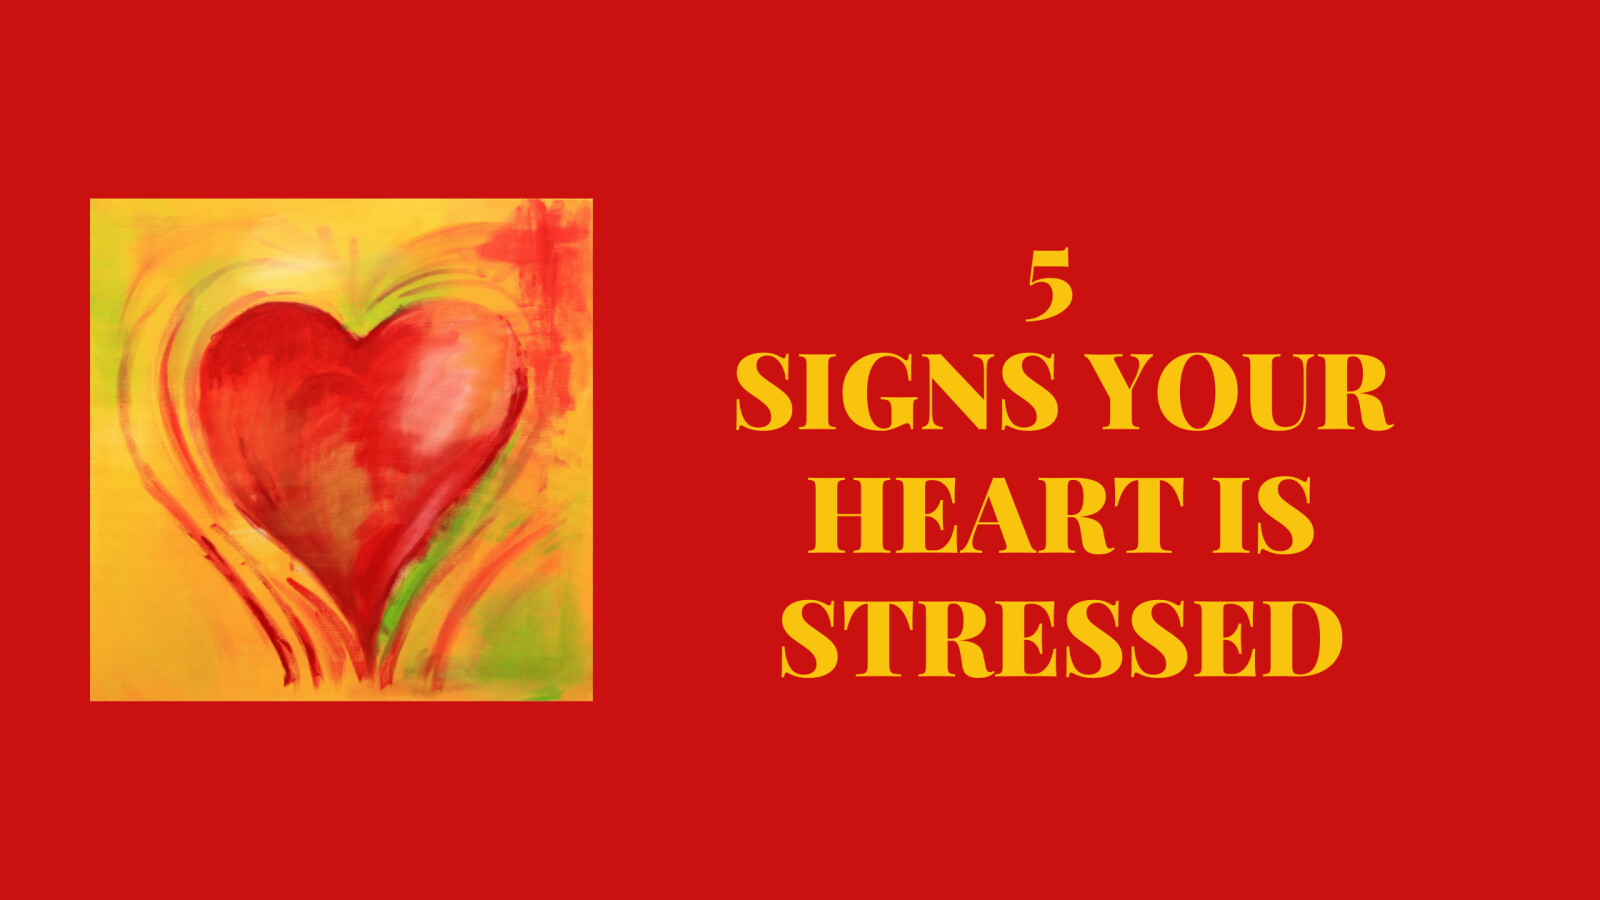 5 Signs Your Heart is Stressed